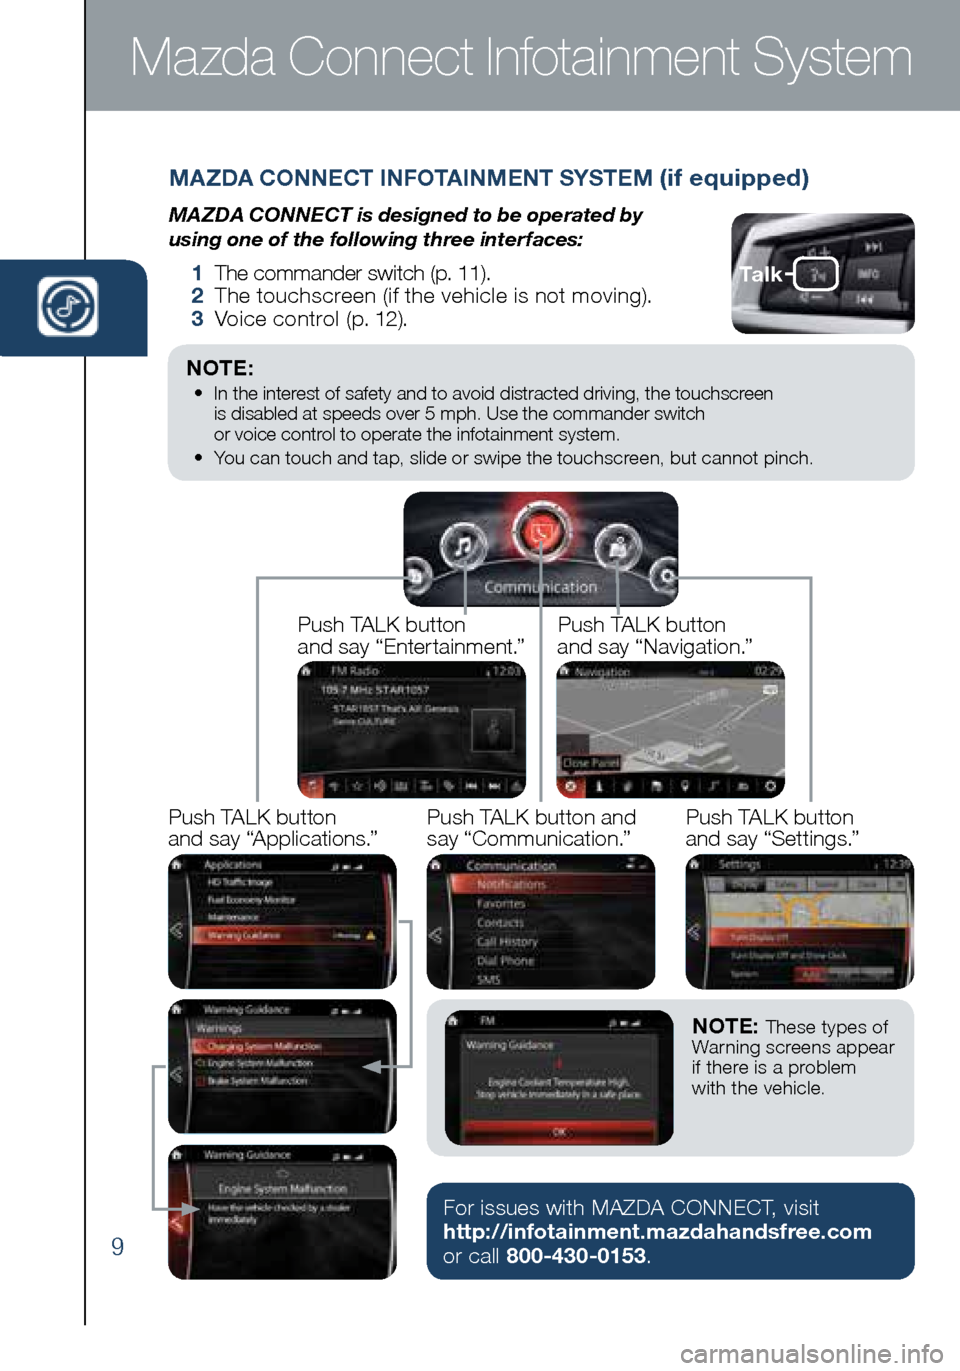 MAZDA MODEL MX-5 2016  Smart Start Guide (in English) 9
MAZDA CONNECT INFOTAINMENT SYSTEM (if equipped)
MAZDA CONNECT is designed to be operated by  
using one of the following three interfaces:
  1   The commander switch (p. 11).
    2   The touchscreen